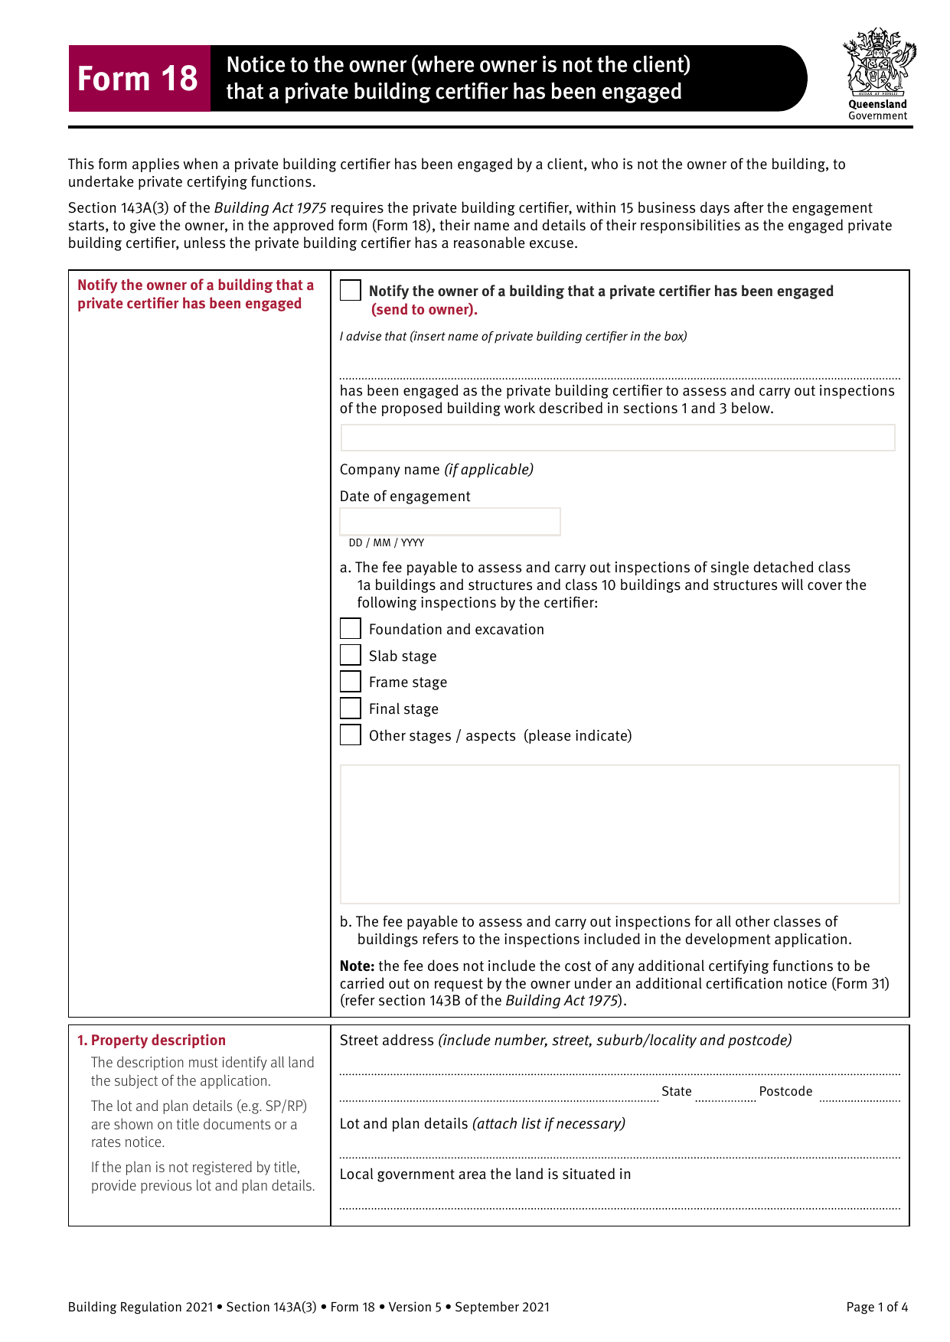 Form 18 Notice to the Owner (Where Owner Is Not the Client) That a Private Building Certifier Has Been Engaged - Queensland, Australia, Page 1